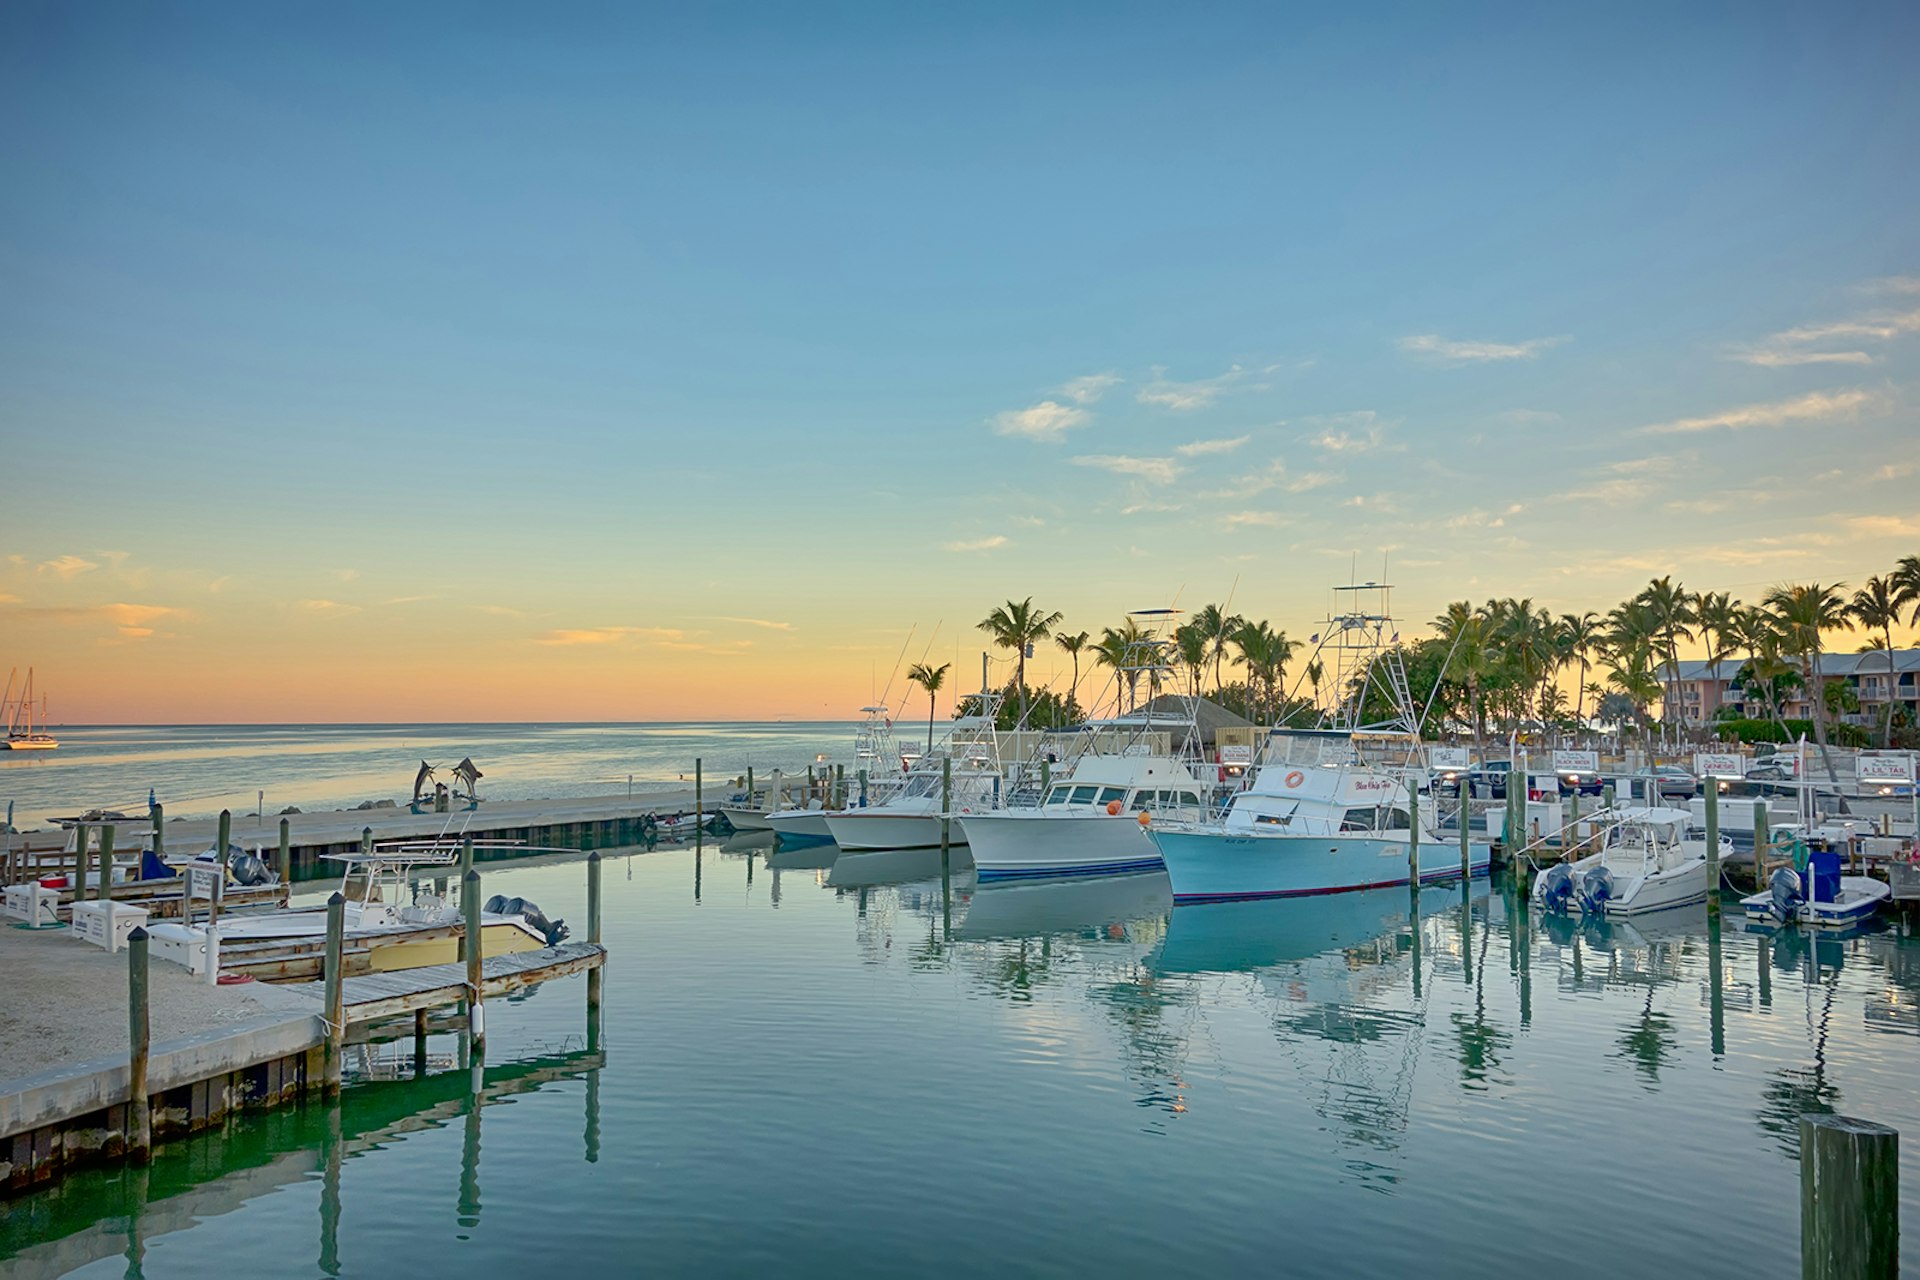 fishing boats in the harbor of the Florida Keys with palm trees and a sunset on the horizon